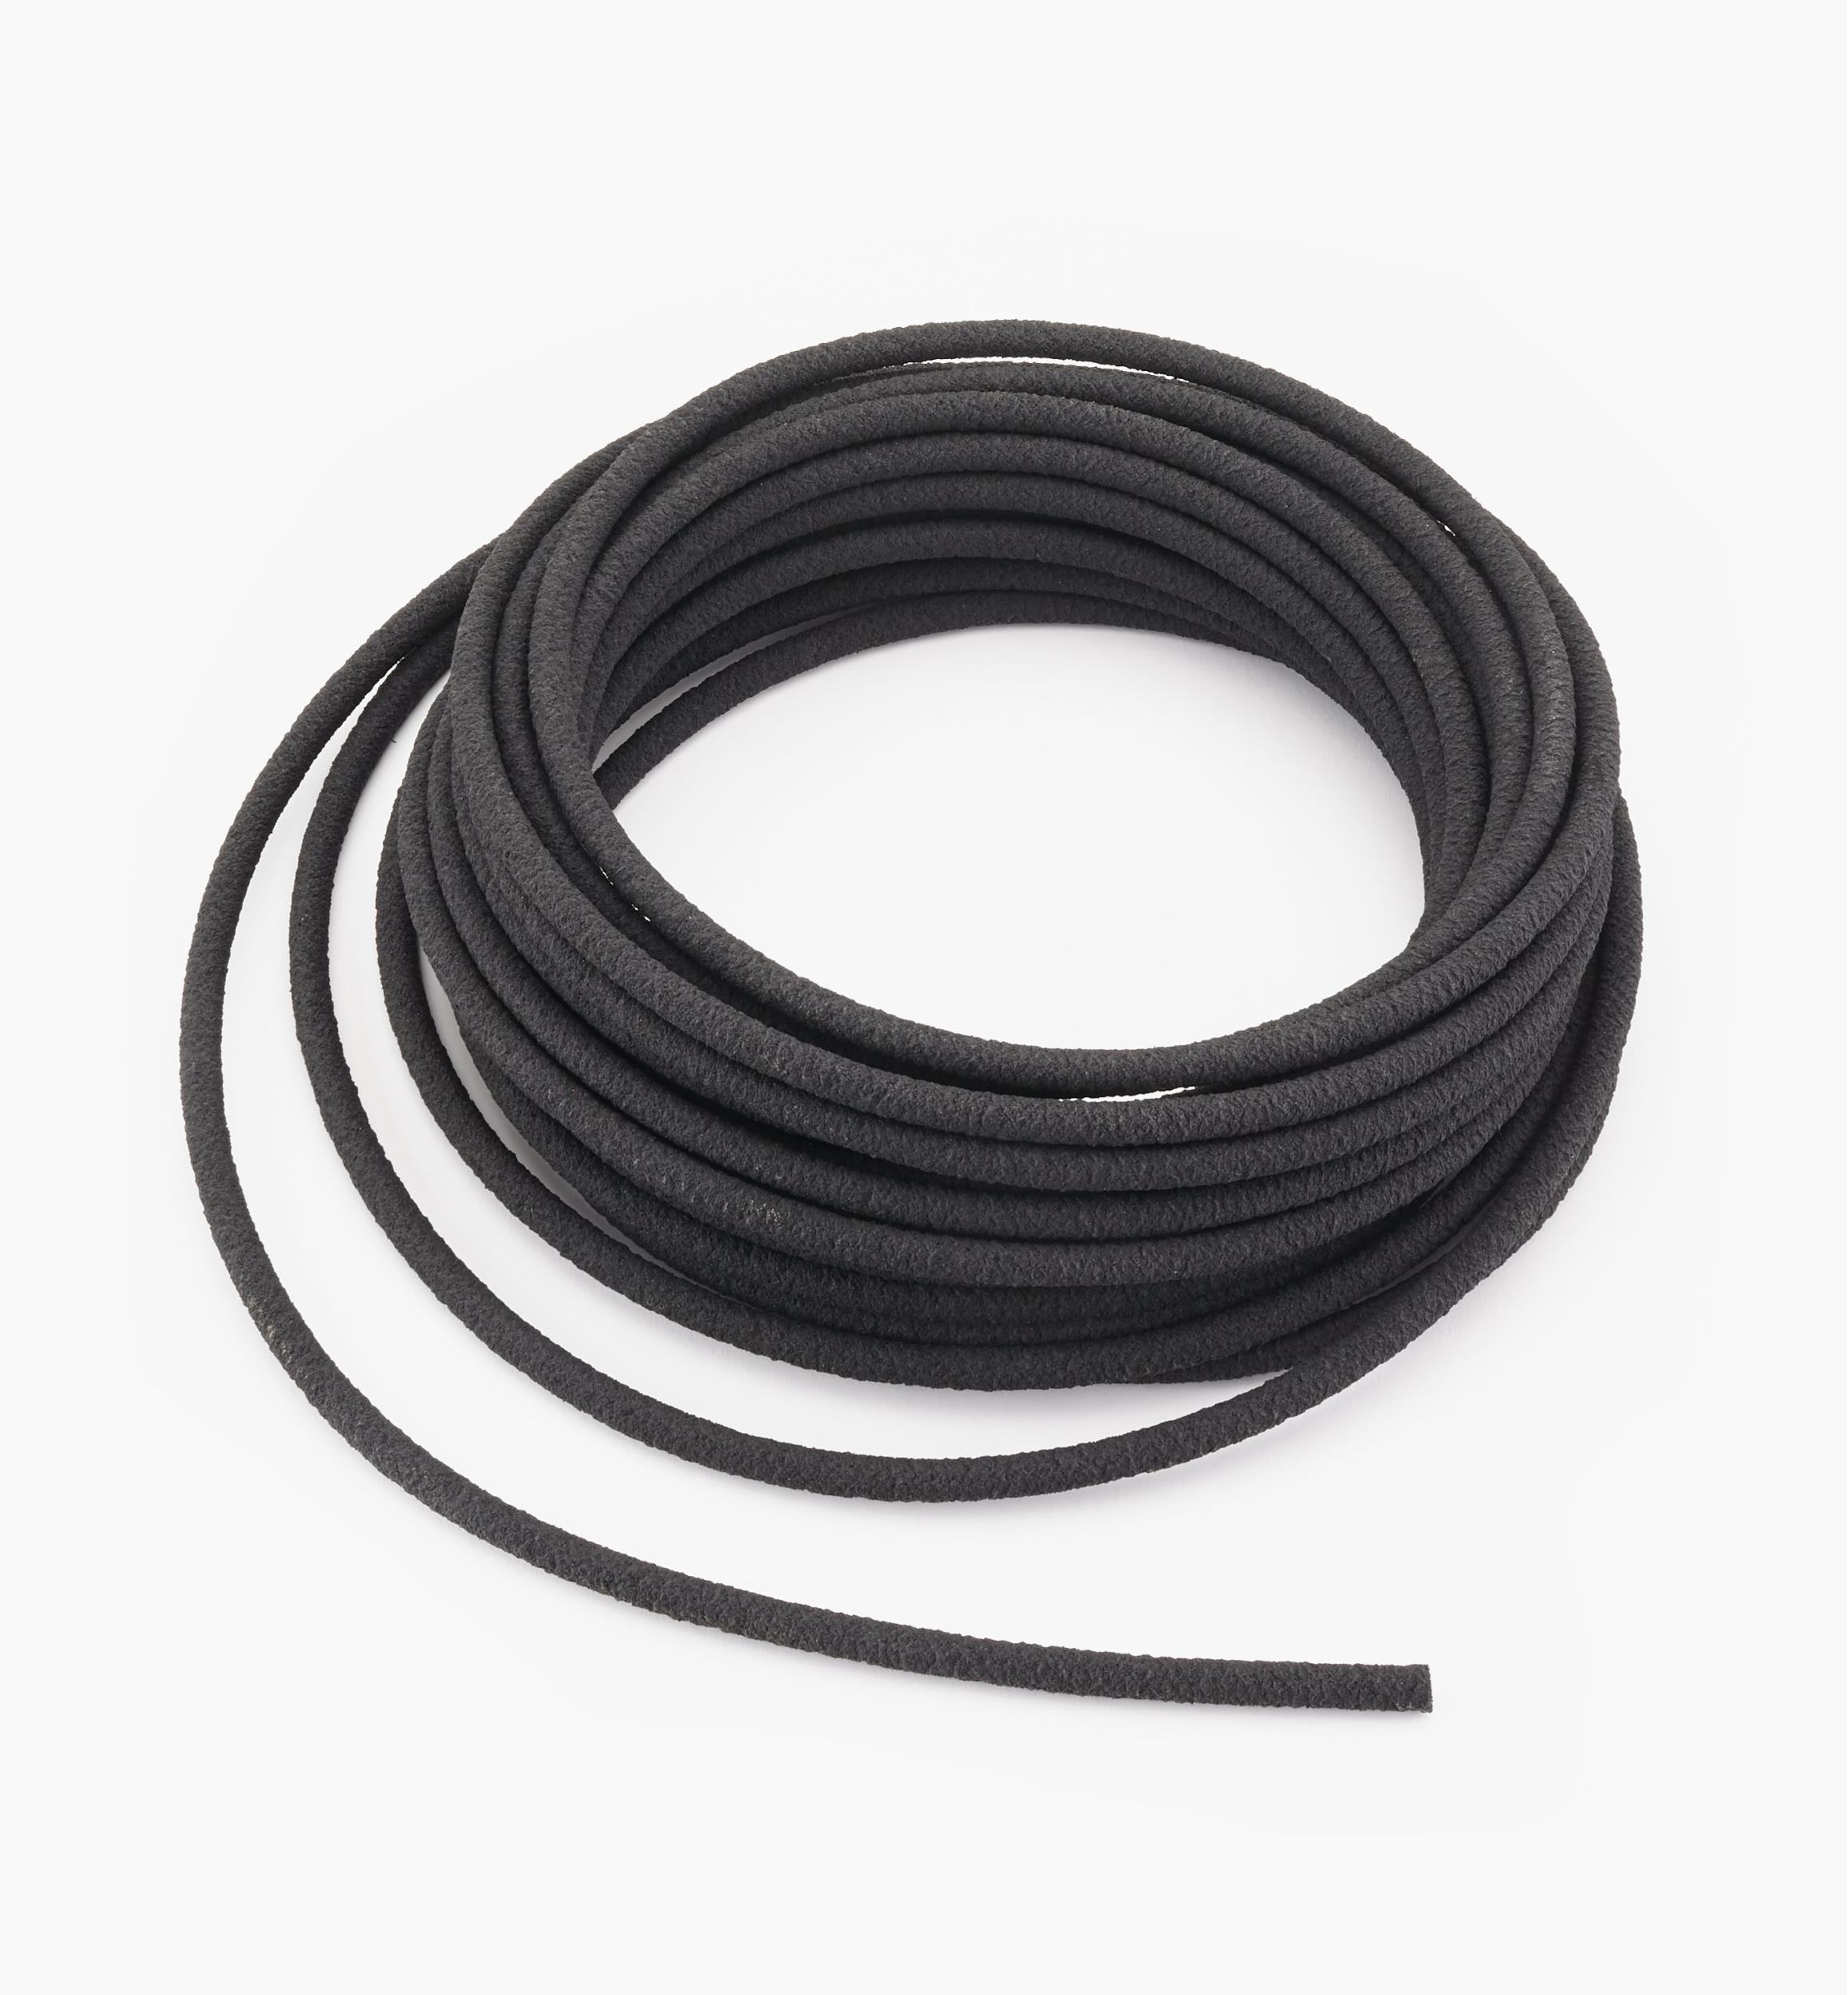 1/4 IN One Stop X 50 FT Porous Drip Line Irrigation Hydroponics Soaker Hose 